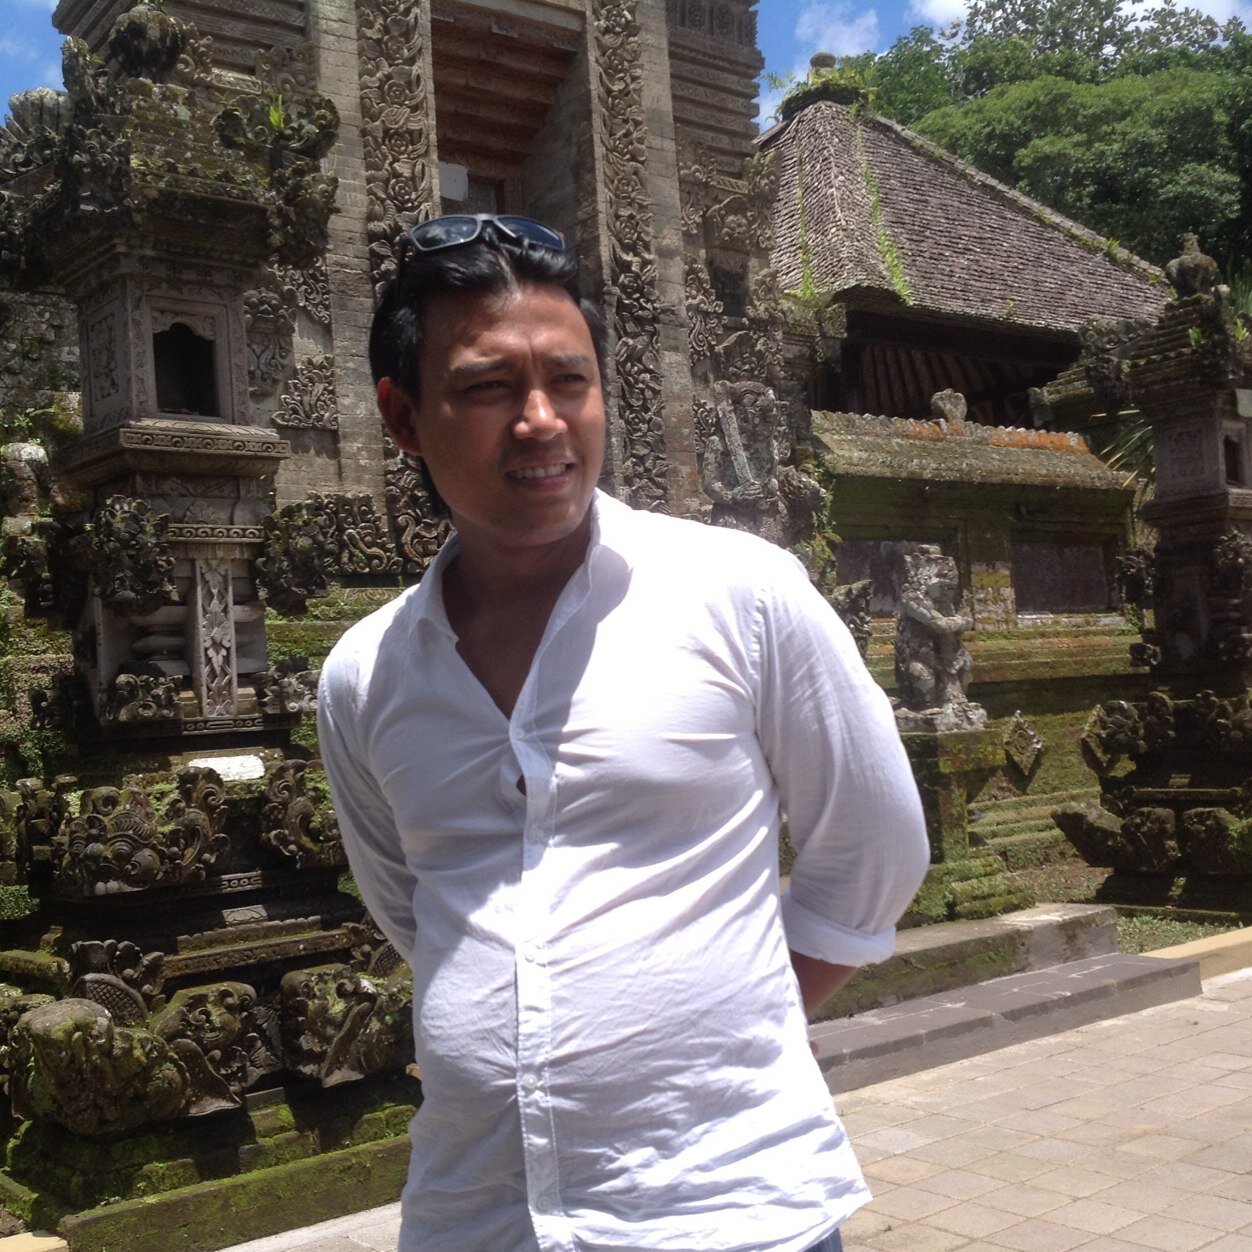 Tour guide of Bali Island,proprerty specialist.